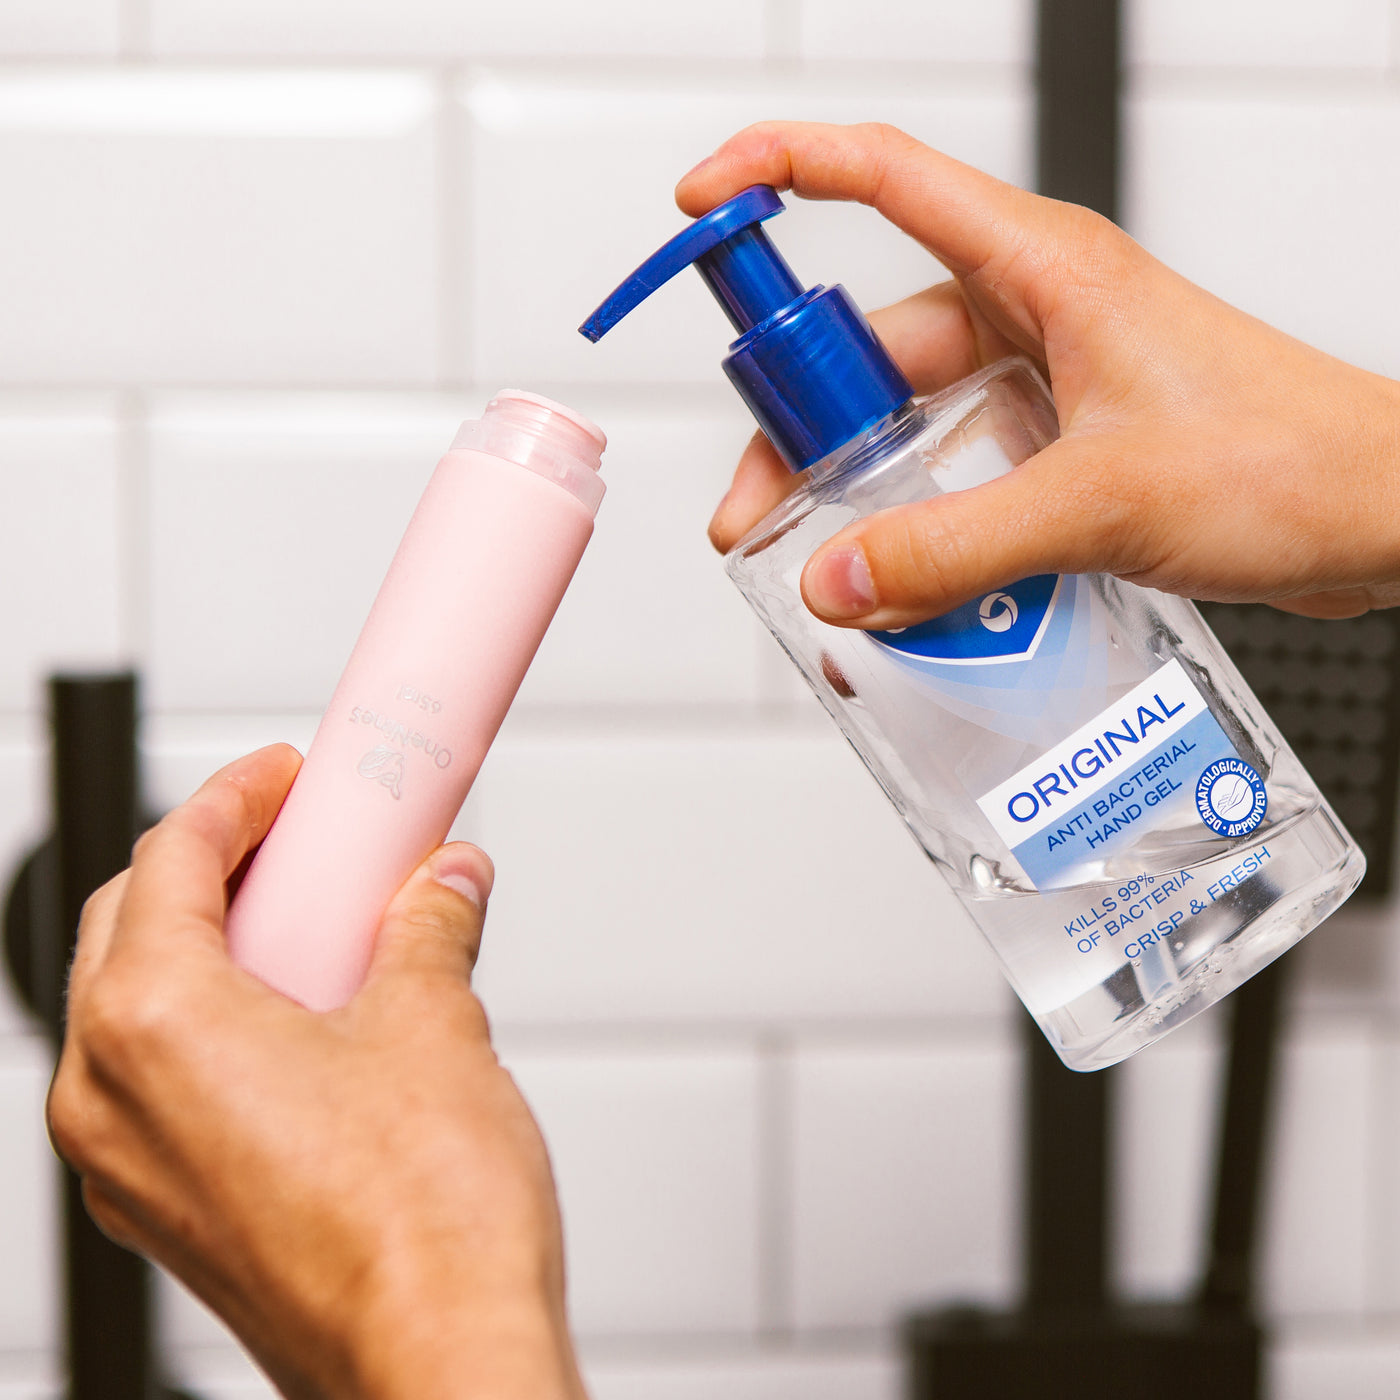 Female hands filling the wide neck of a pink OneNine5 silicone bottle with anti-bacterial hand sanitiser (gel)